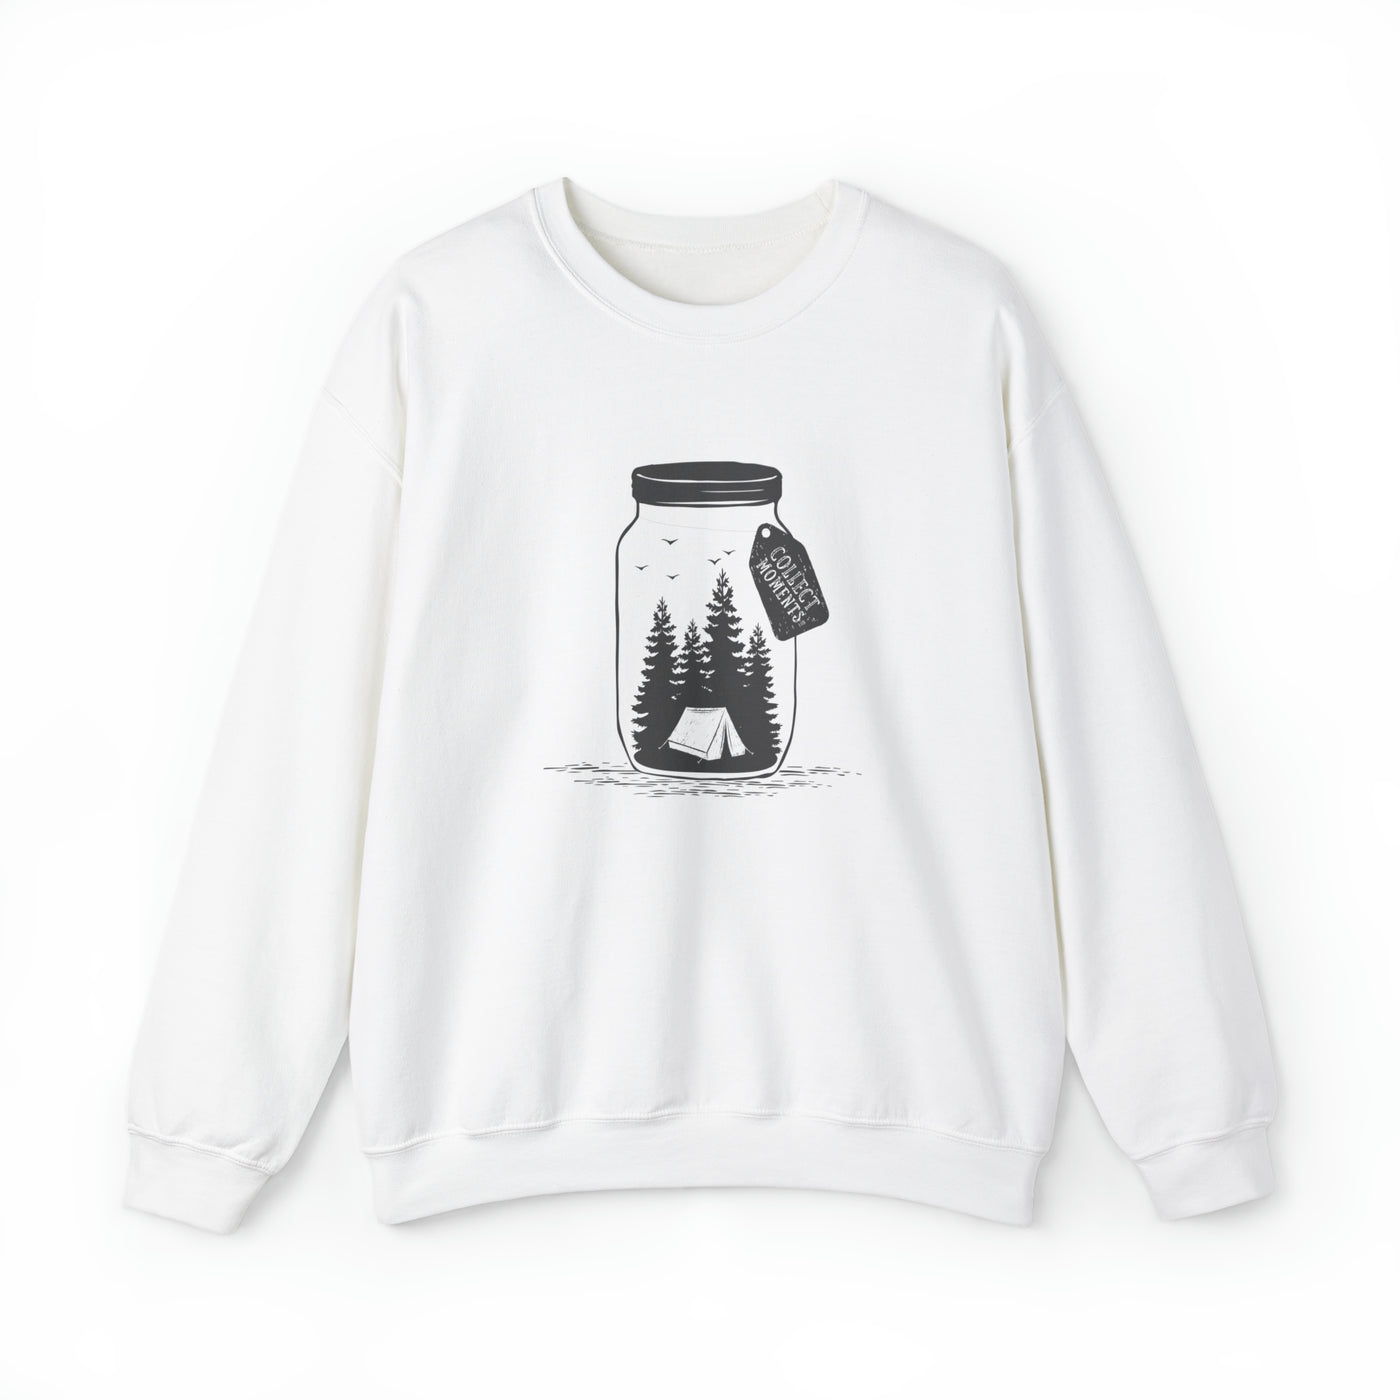 Collect Moments Not Things Crewneck Sweatshirt